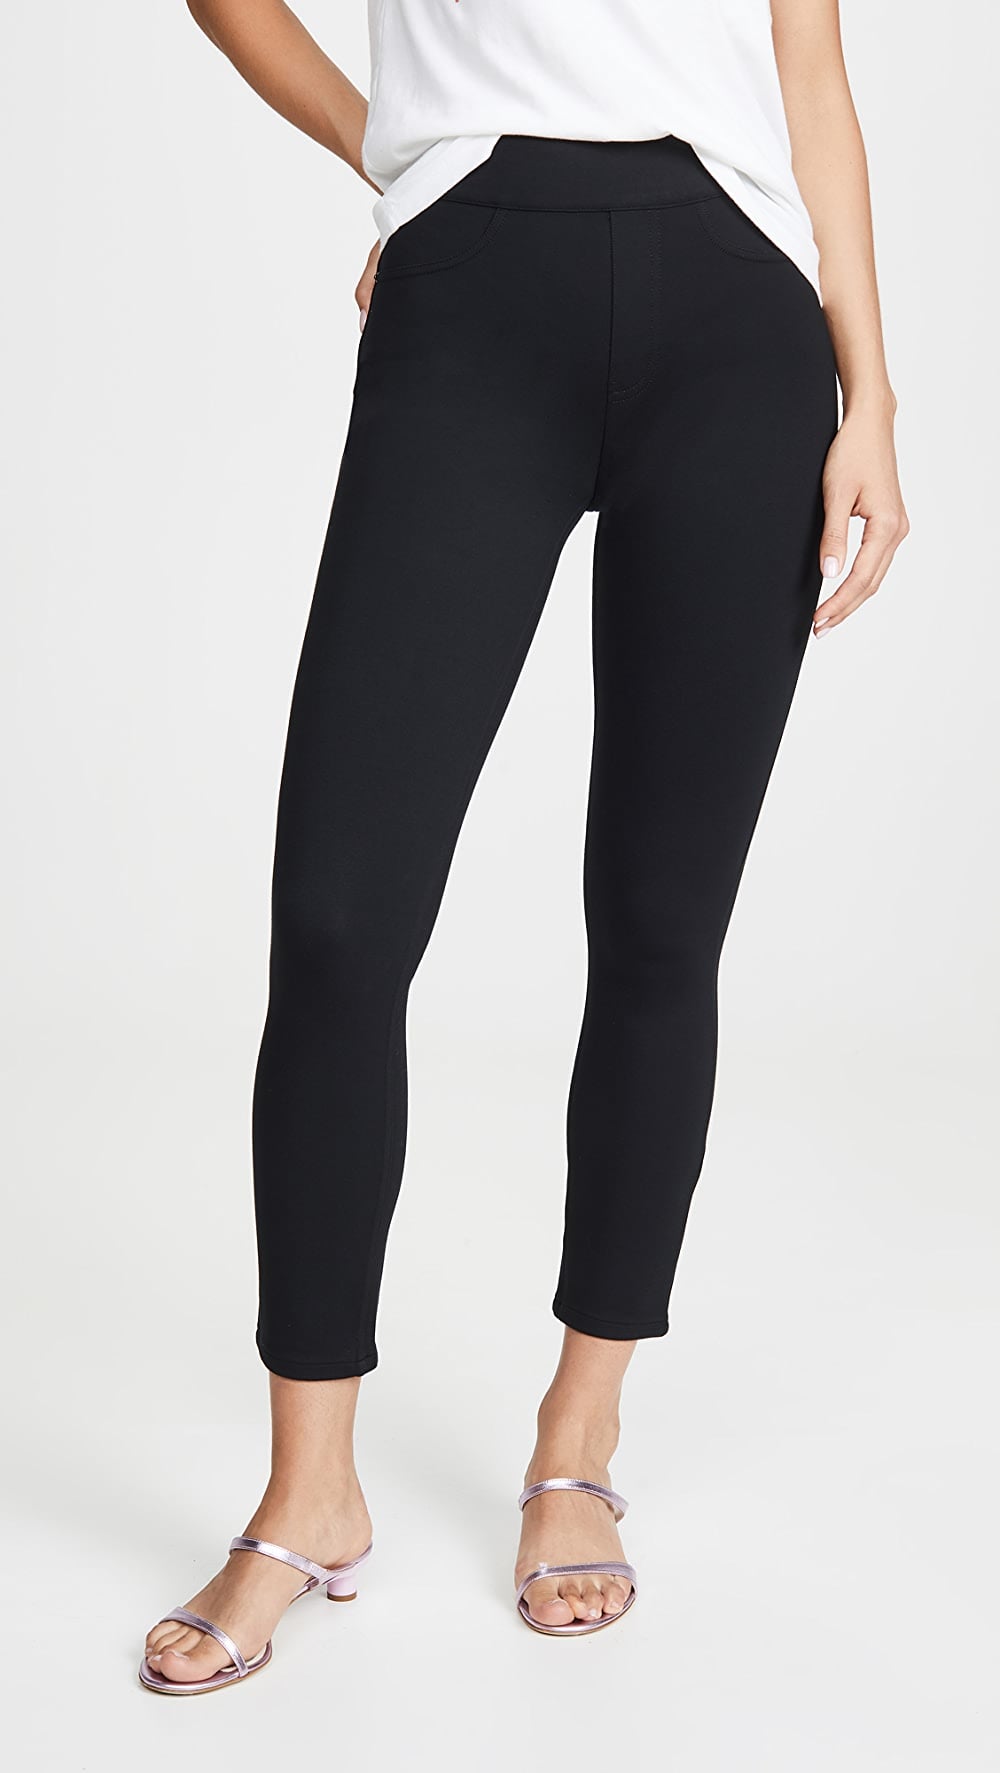 Spanx Ponte Leggings  These 15 Leggings Will Make You Look and